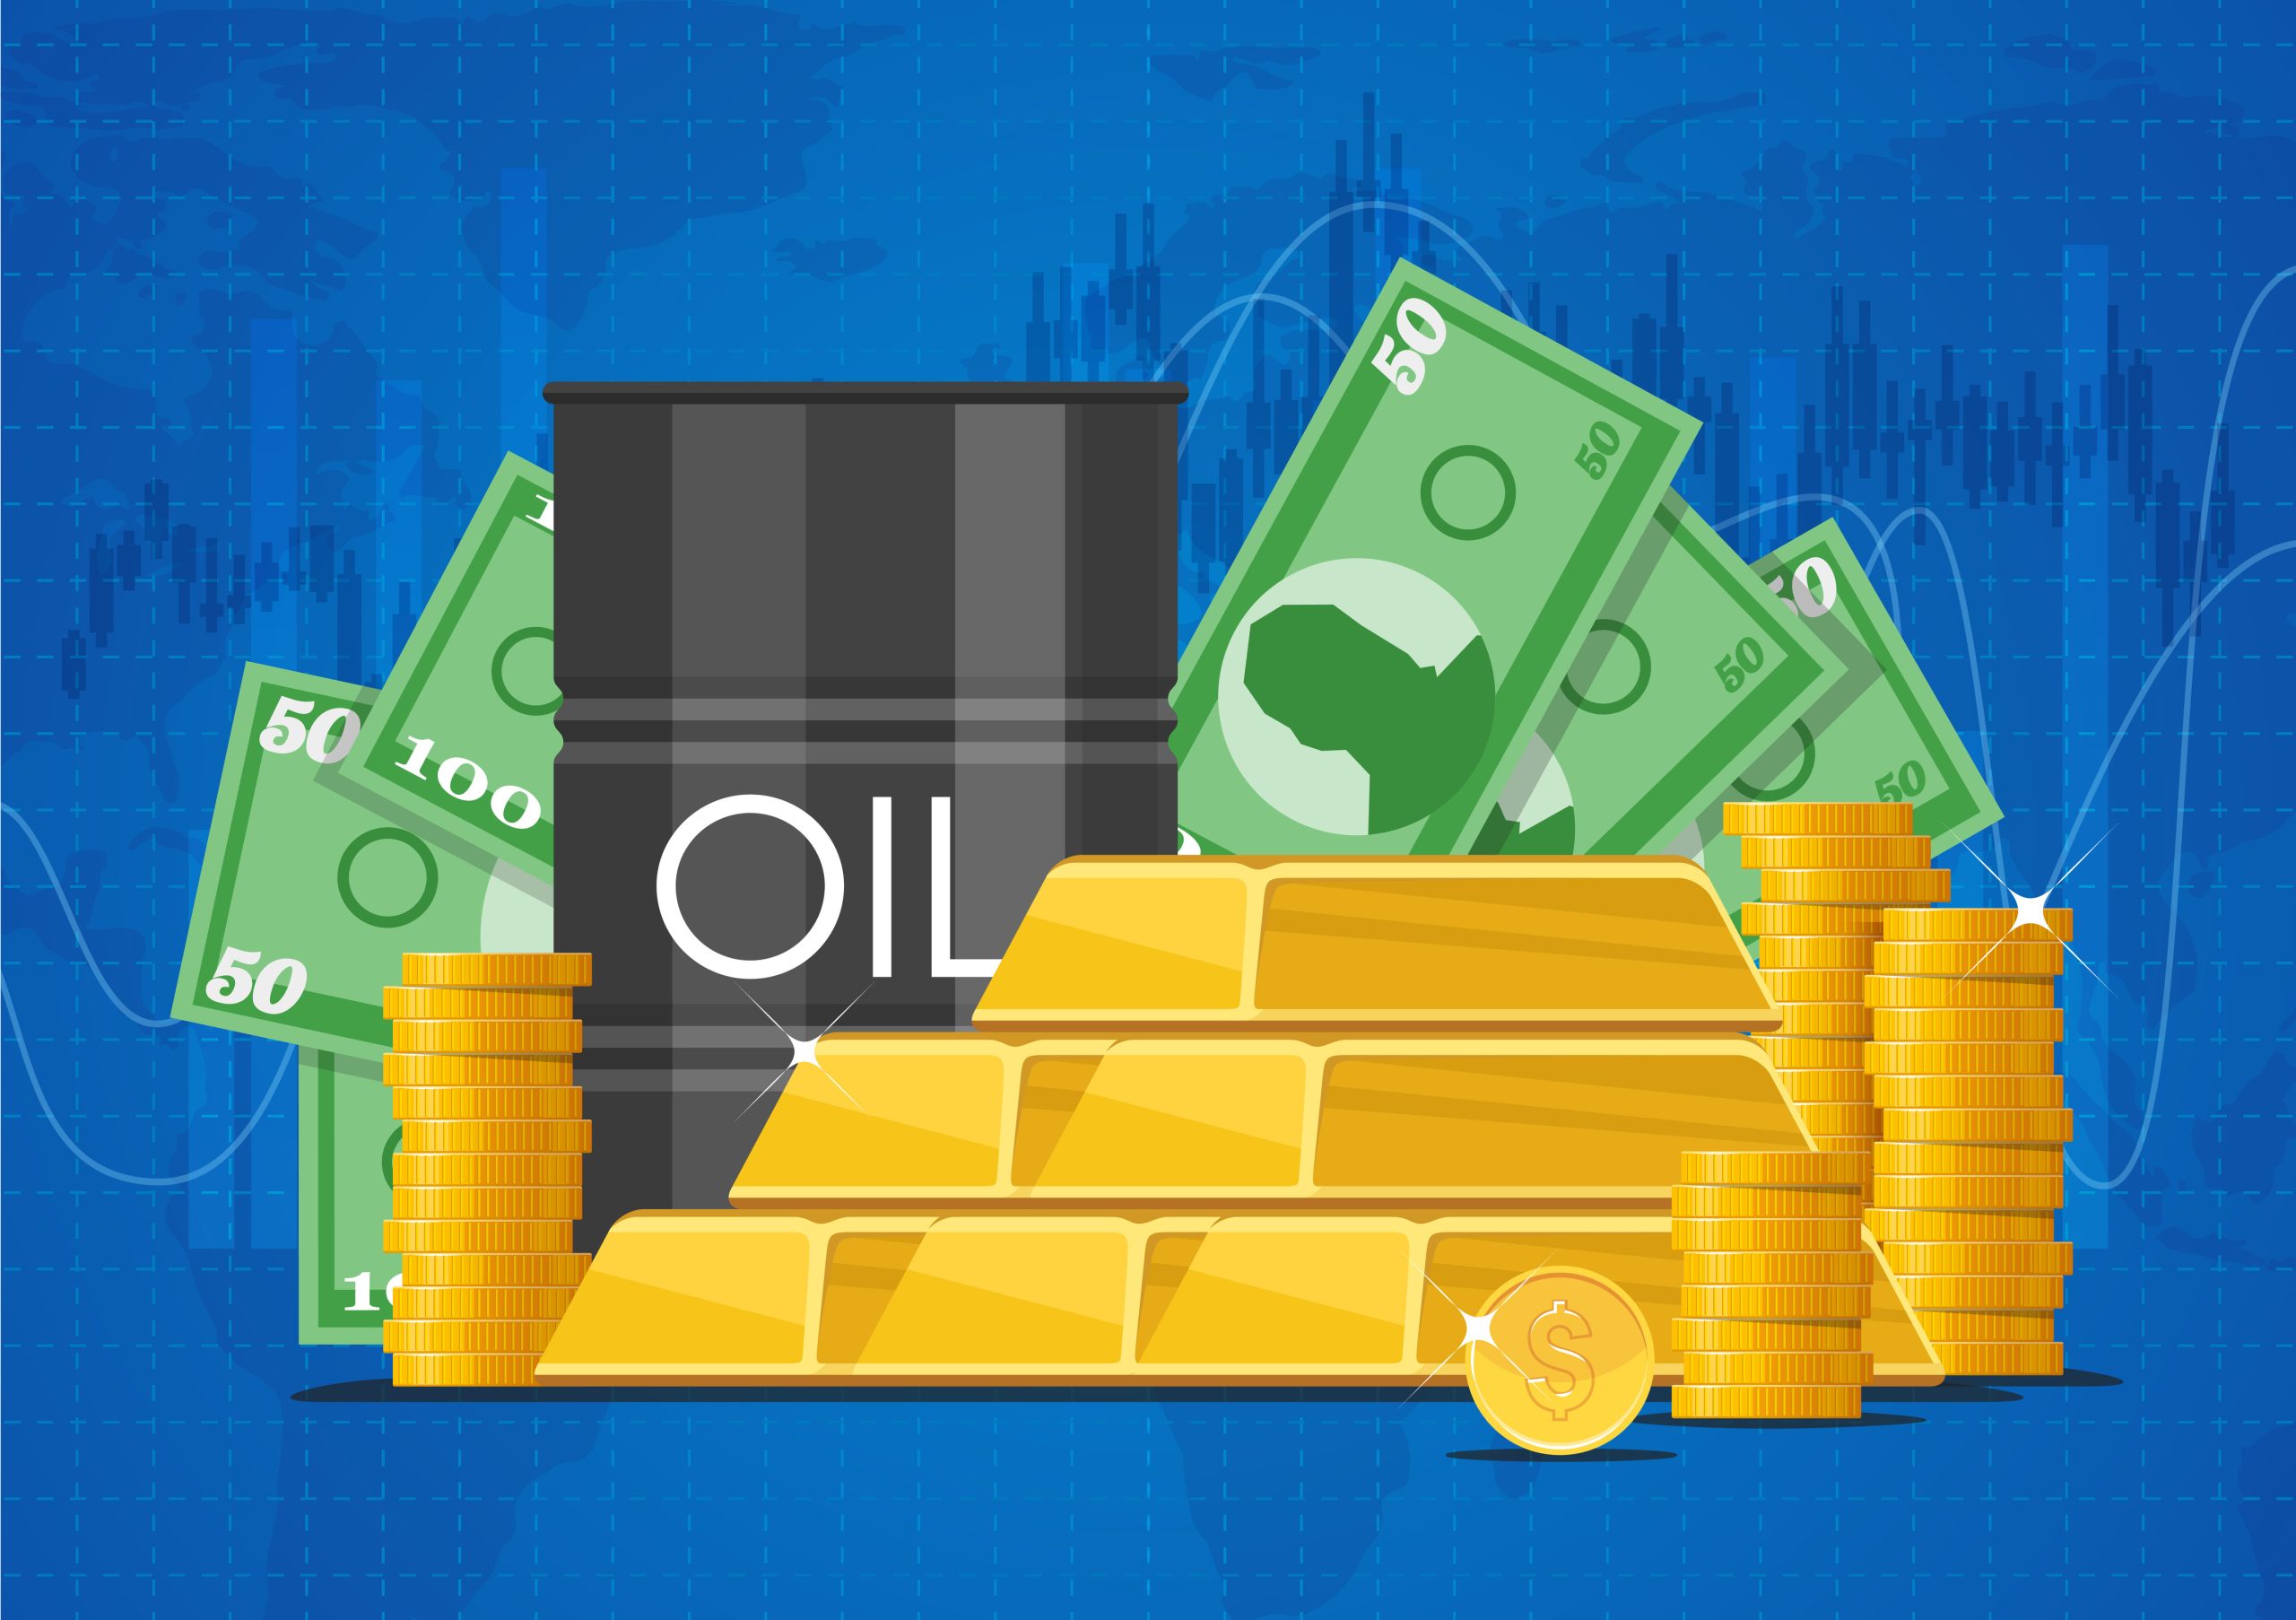 Oil recovers, gold under pressure